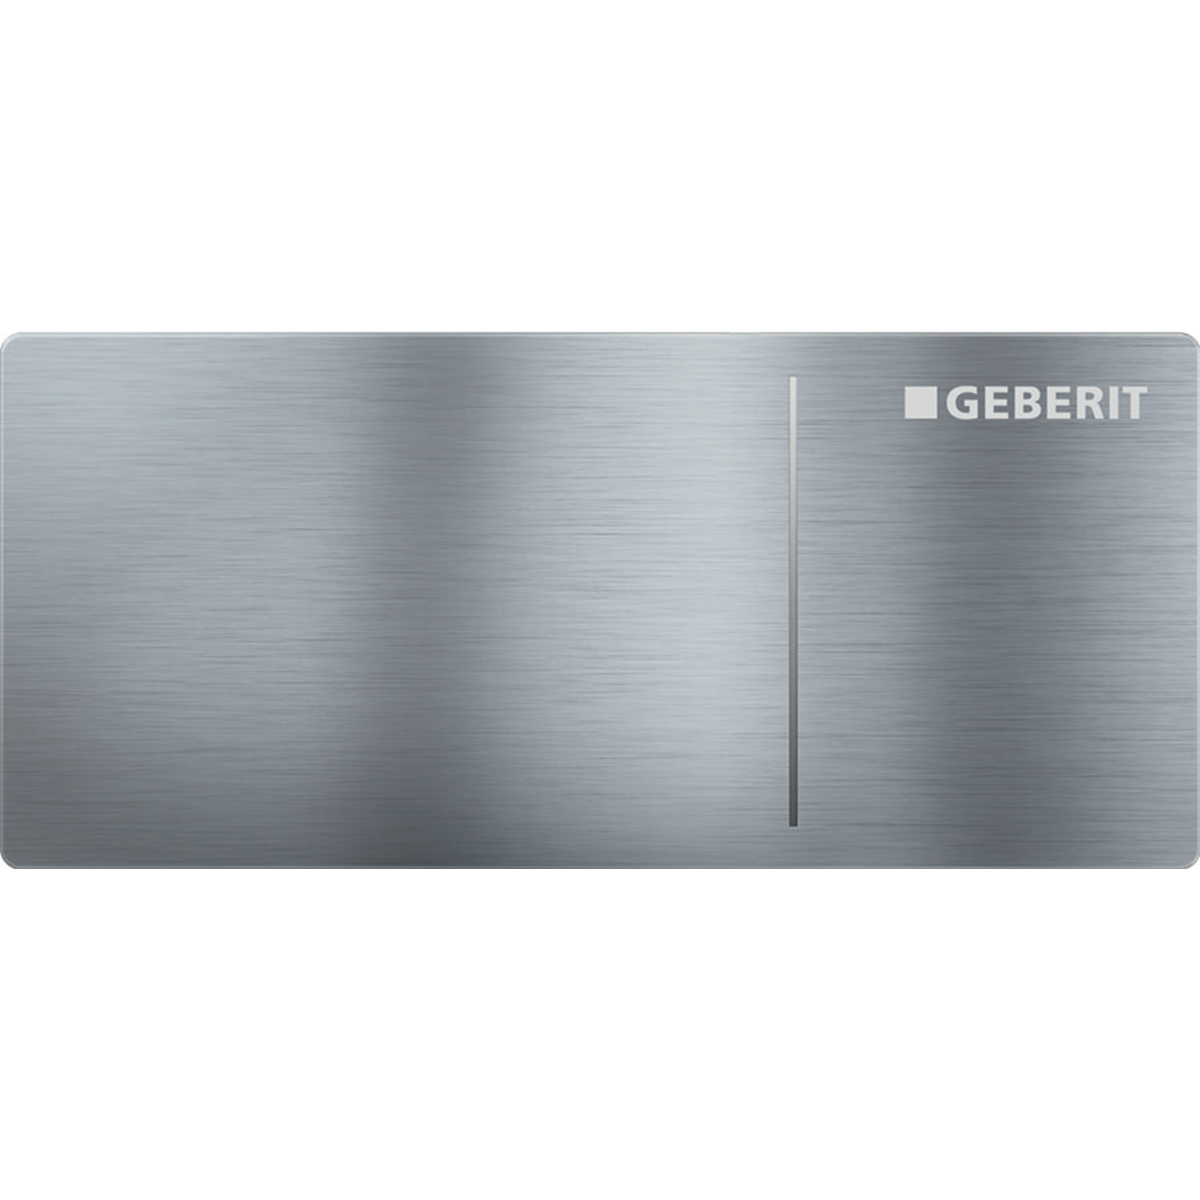 Geberit 115.630.FW.1 Remote Flush Actuation Type 70 for Dual Flush, for Sigma Concealed Cistern 12 Cm - Stainless Steel Brushed